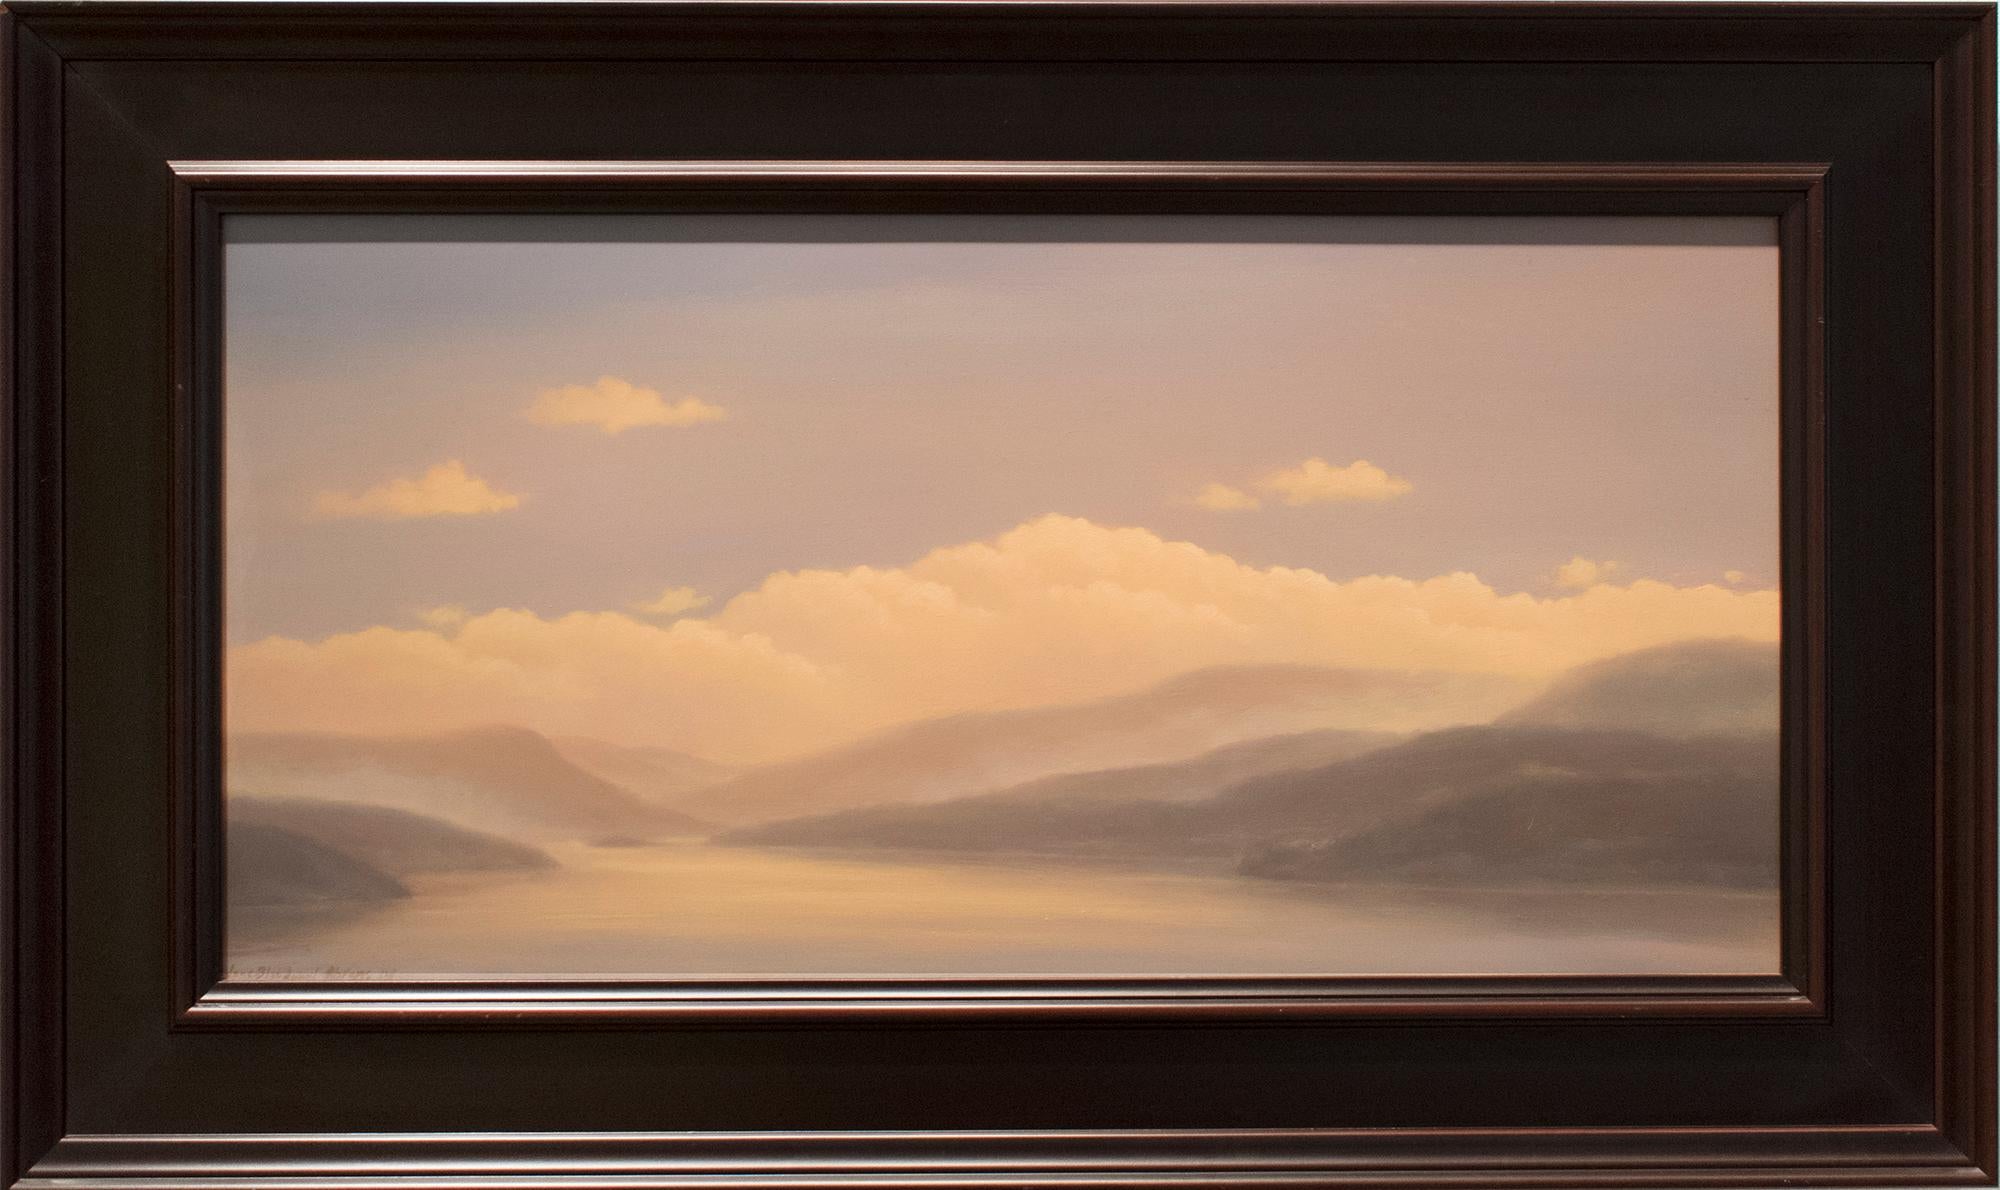 Mist Rising on the Hudson (Landscape of the Hudson Valley) - Painting by Jane Bloodgood-Abrams